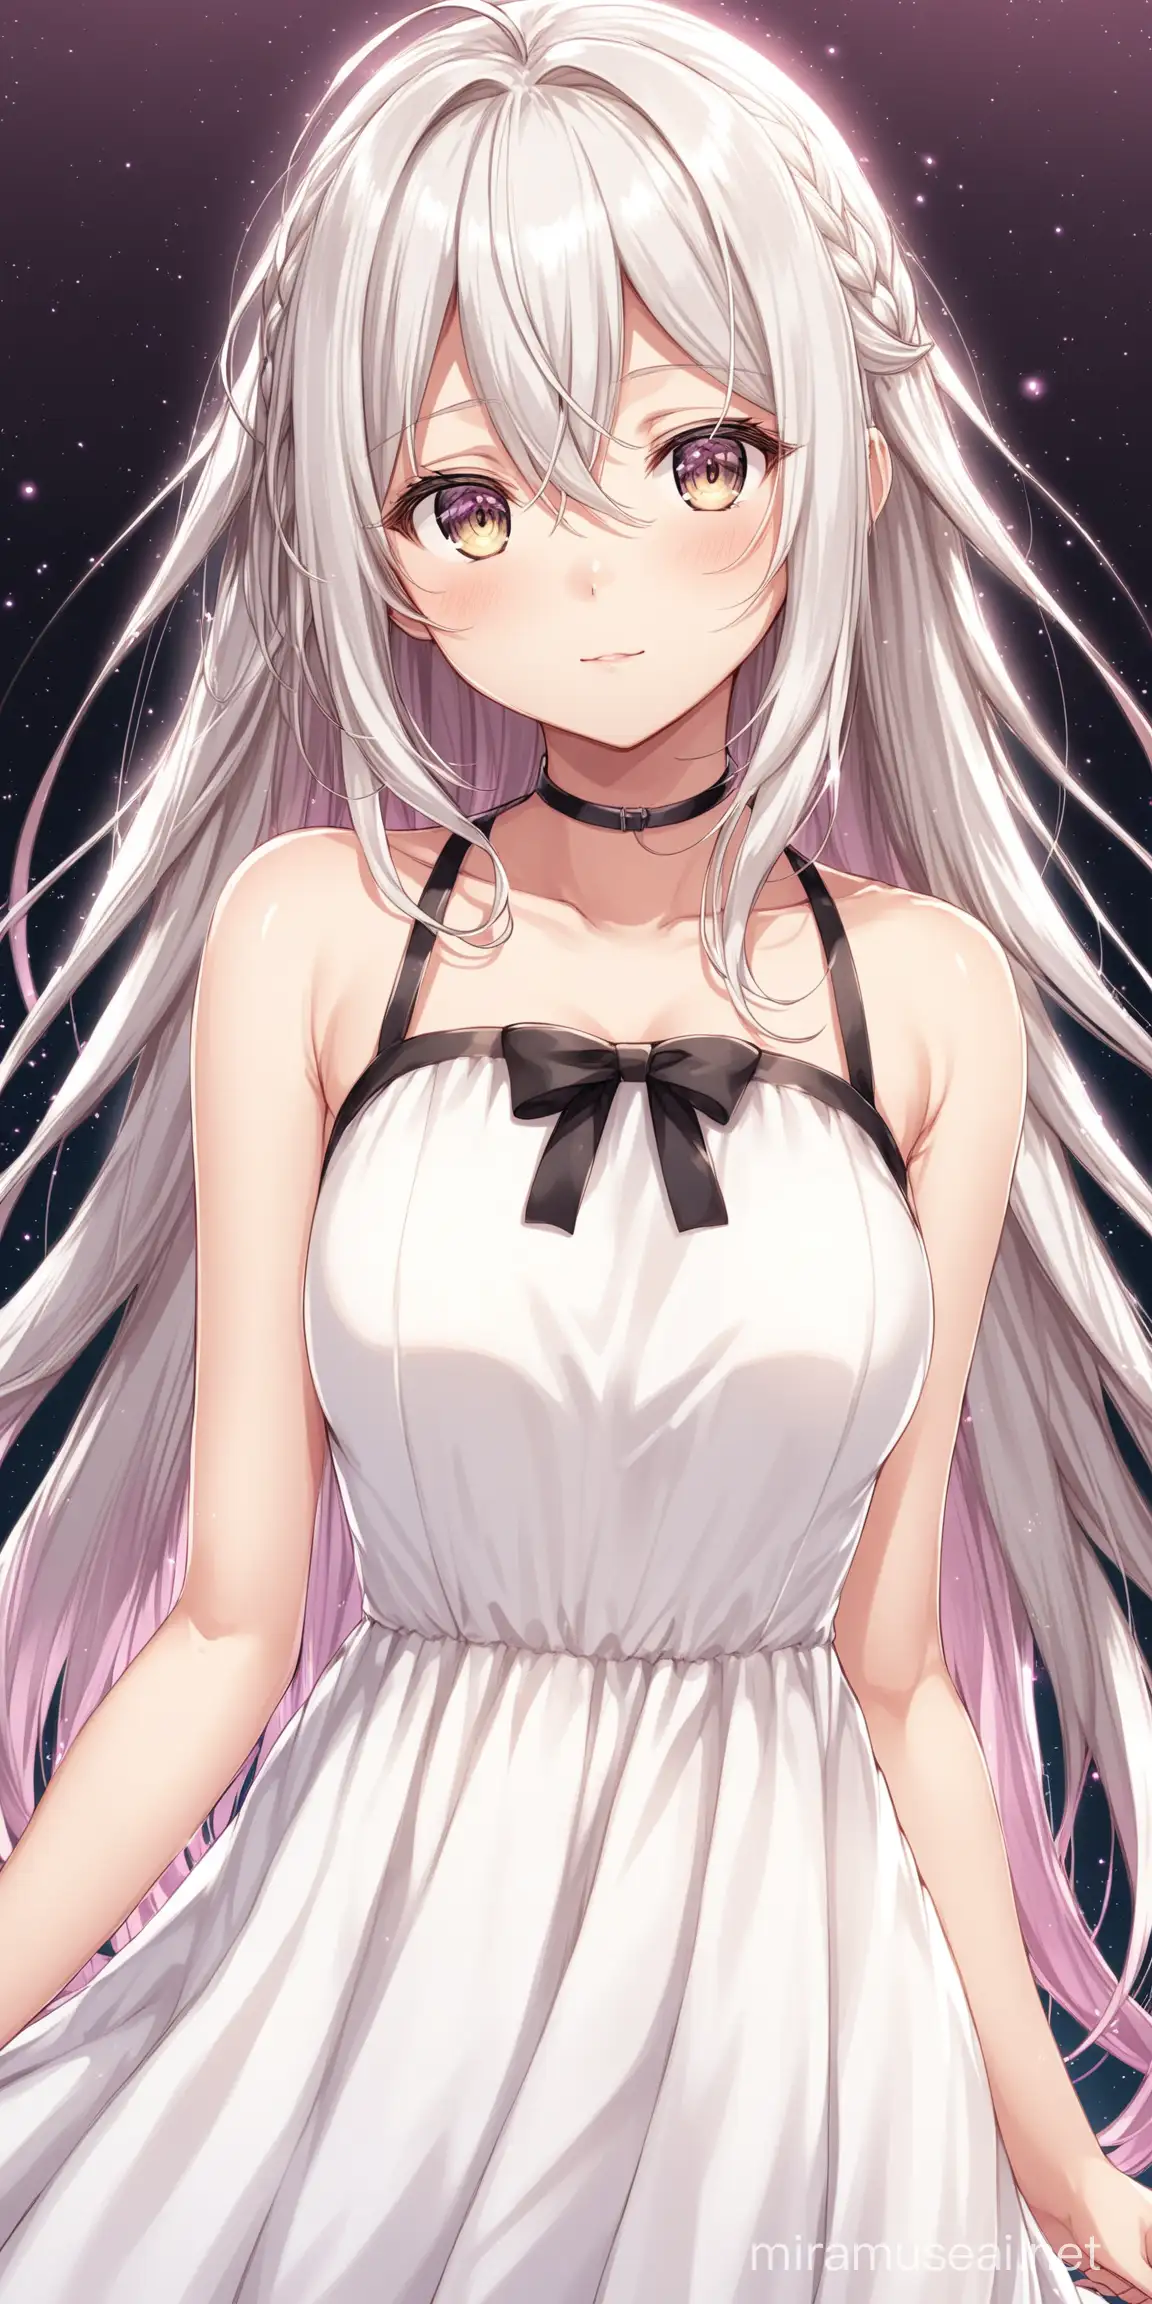 Serene Anime Girl with Silver Hair in White Dress